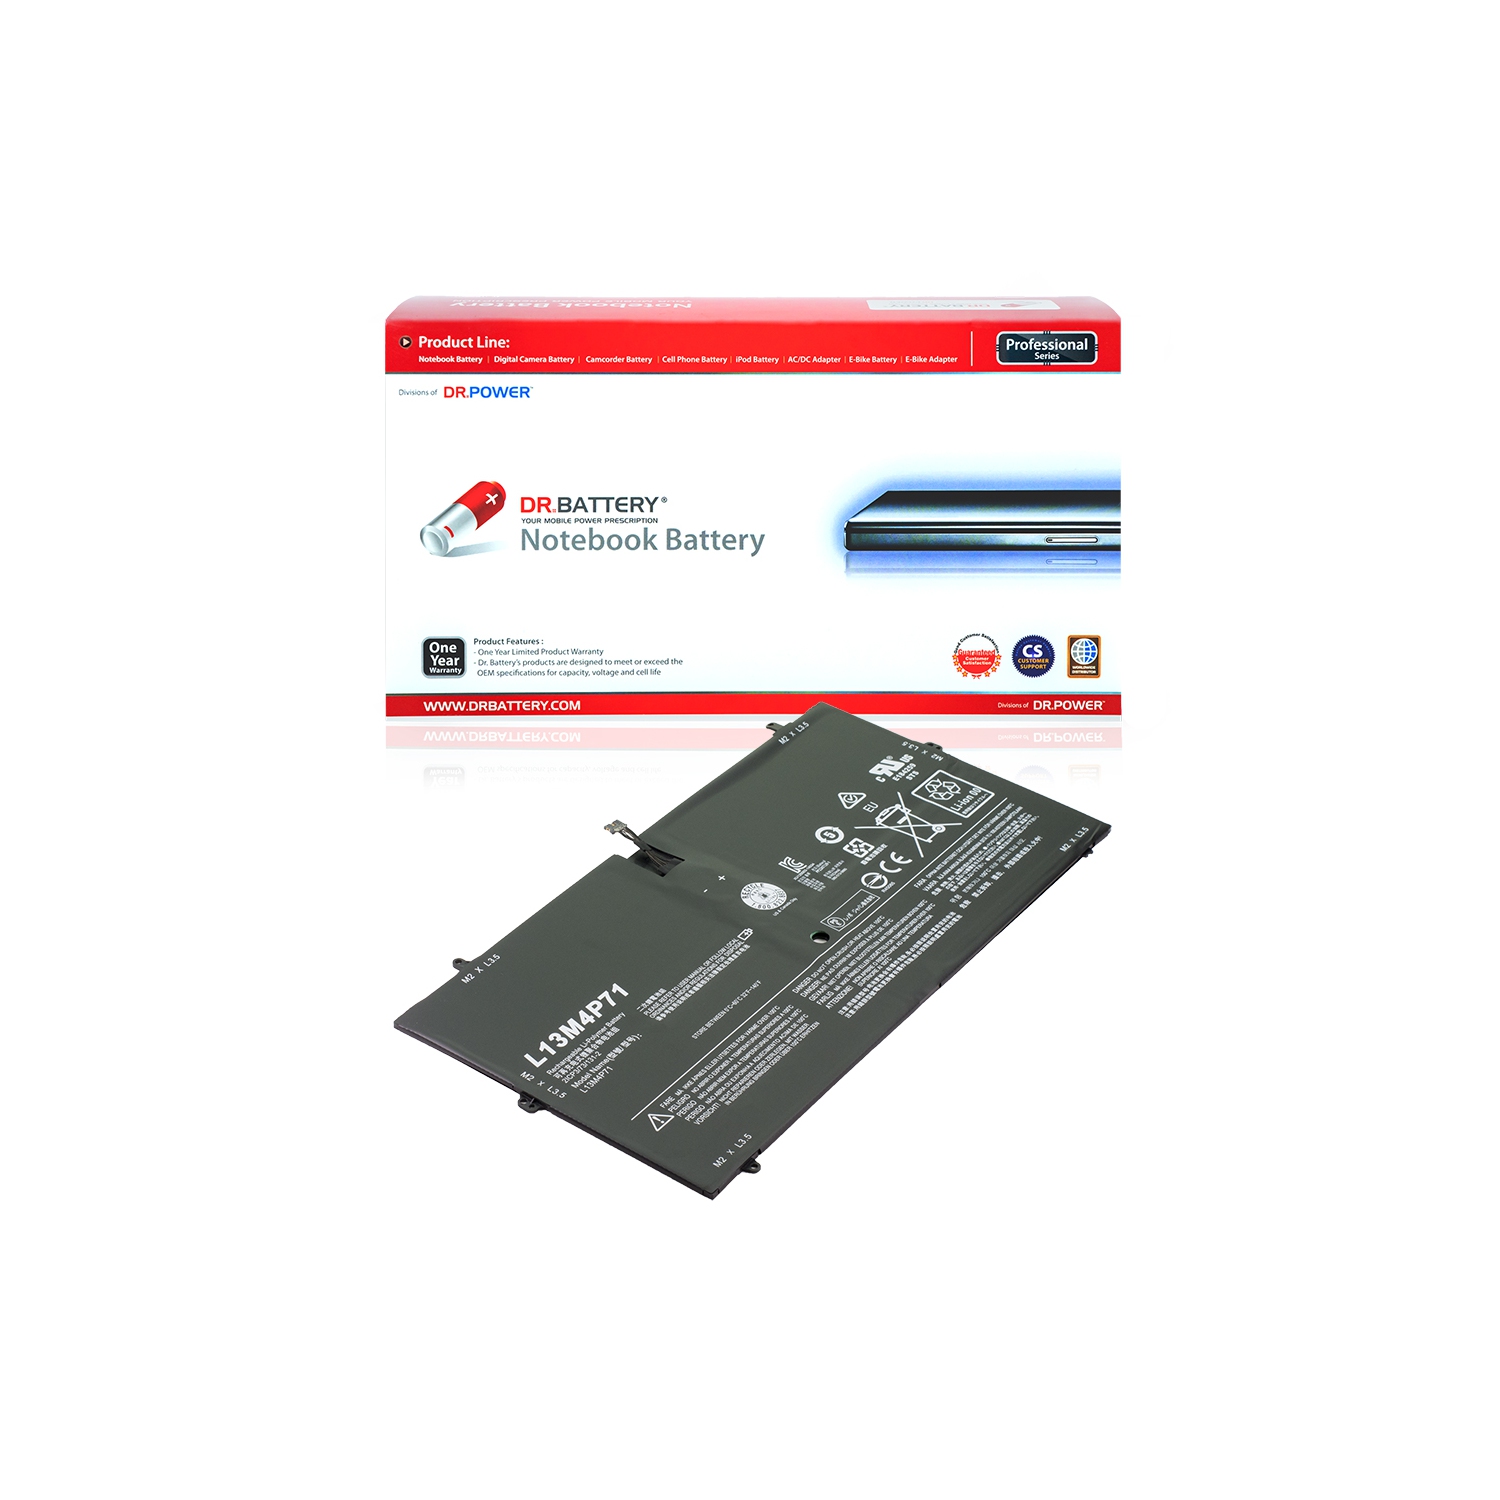 DR. BATTERY - Replacement for Lenovo Yoga 3 Pro-I5Y70(L) / Pro-I5Y71 / Pro-5Y71 / Pro-I5Y51 / L13M4P71 / L14S4P71